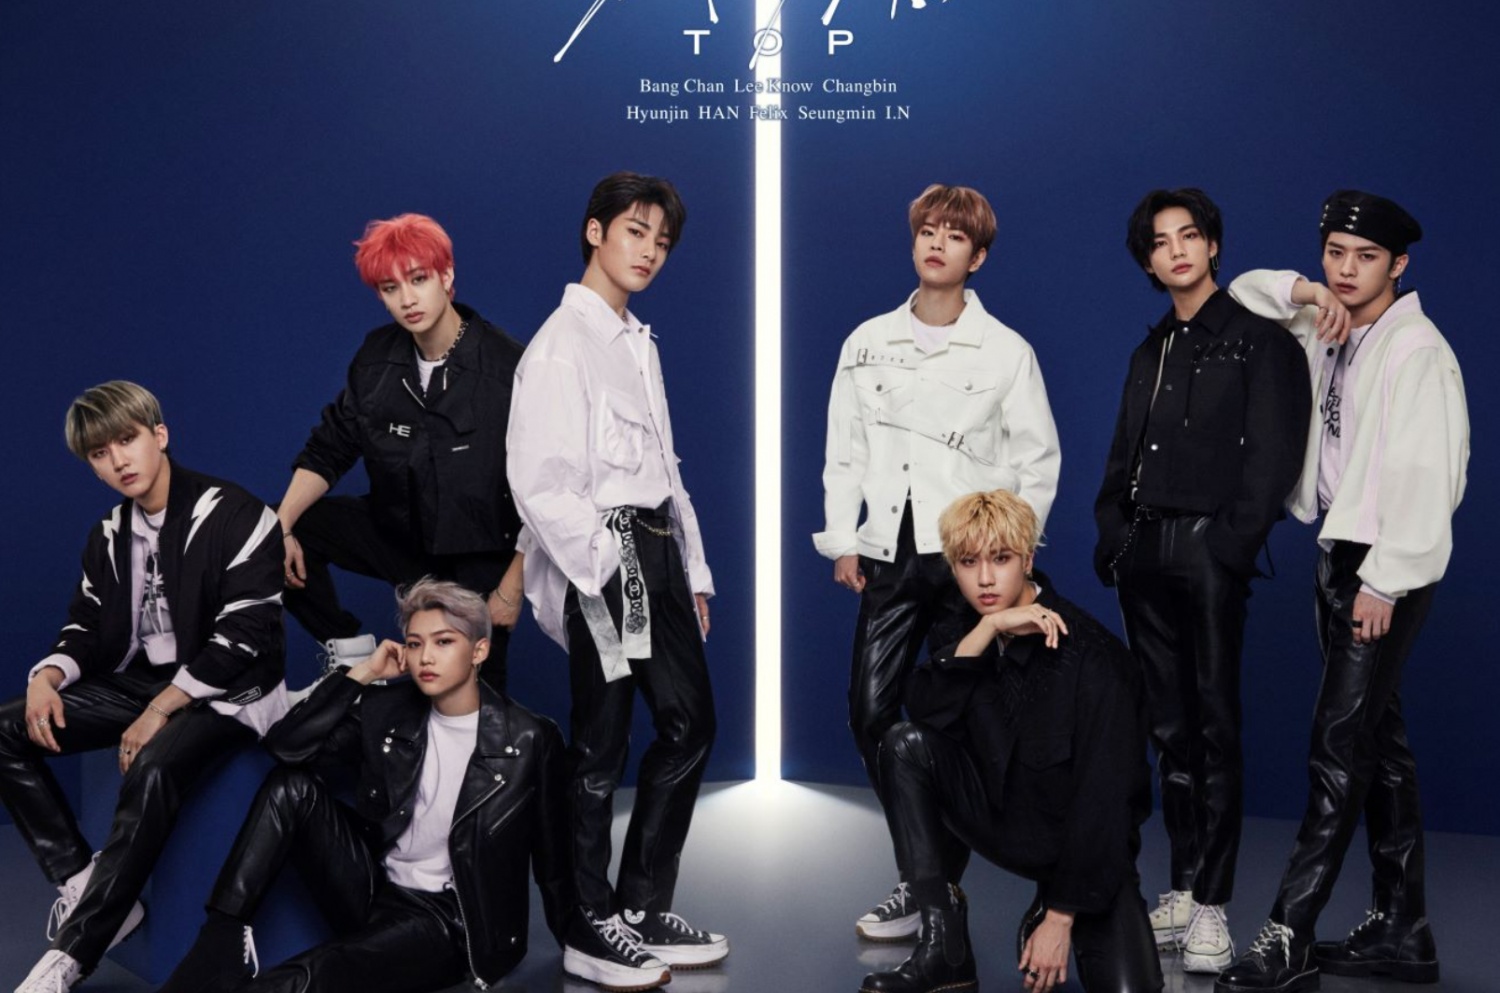 Stray Kids' 'TOP' Becomes 2nd Japanese Single by K-pop Act to Score ...